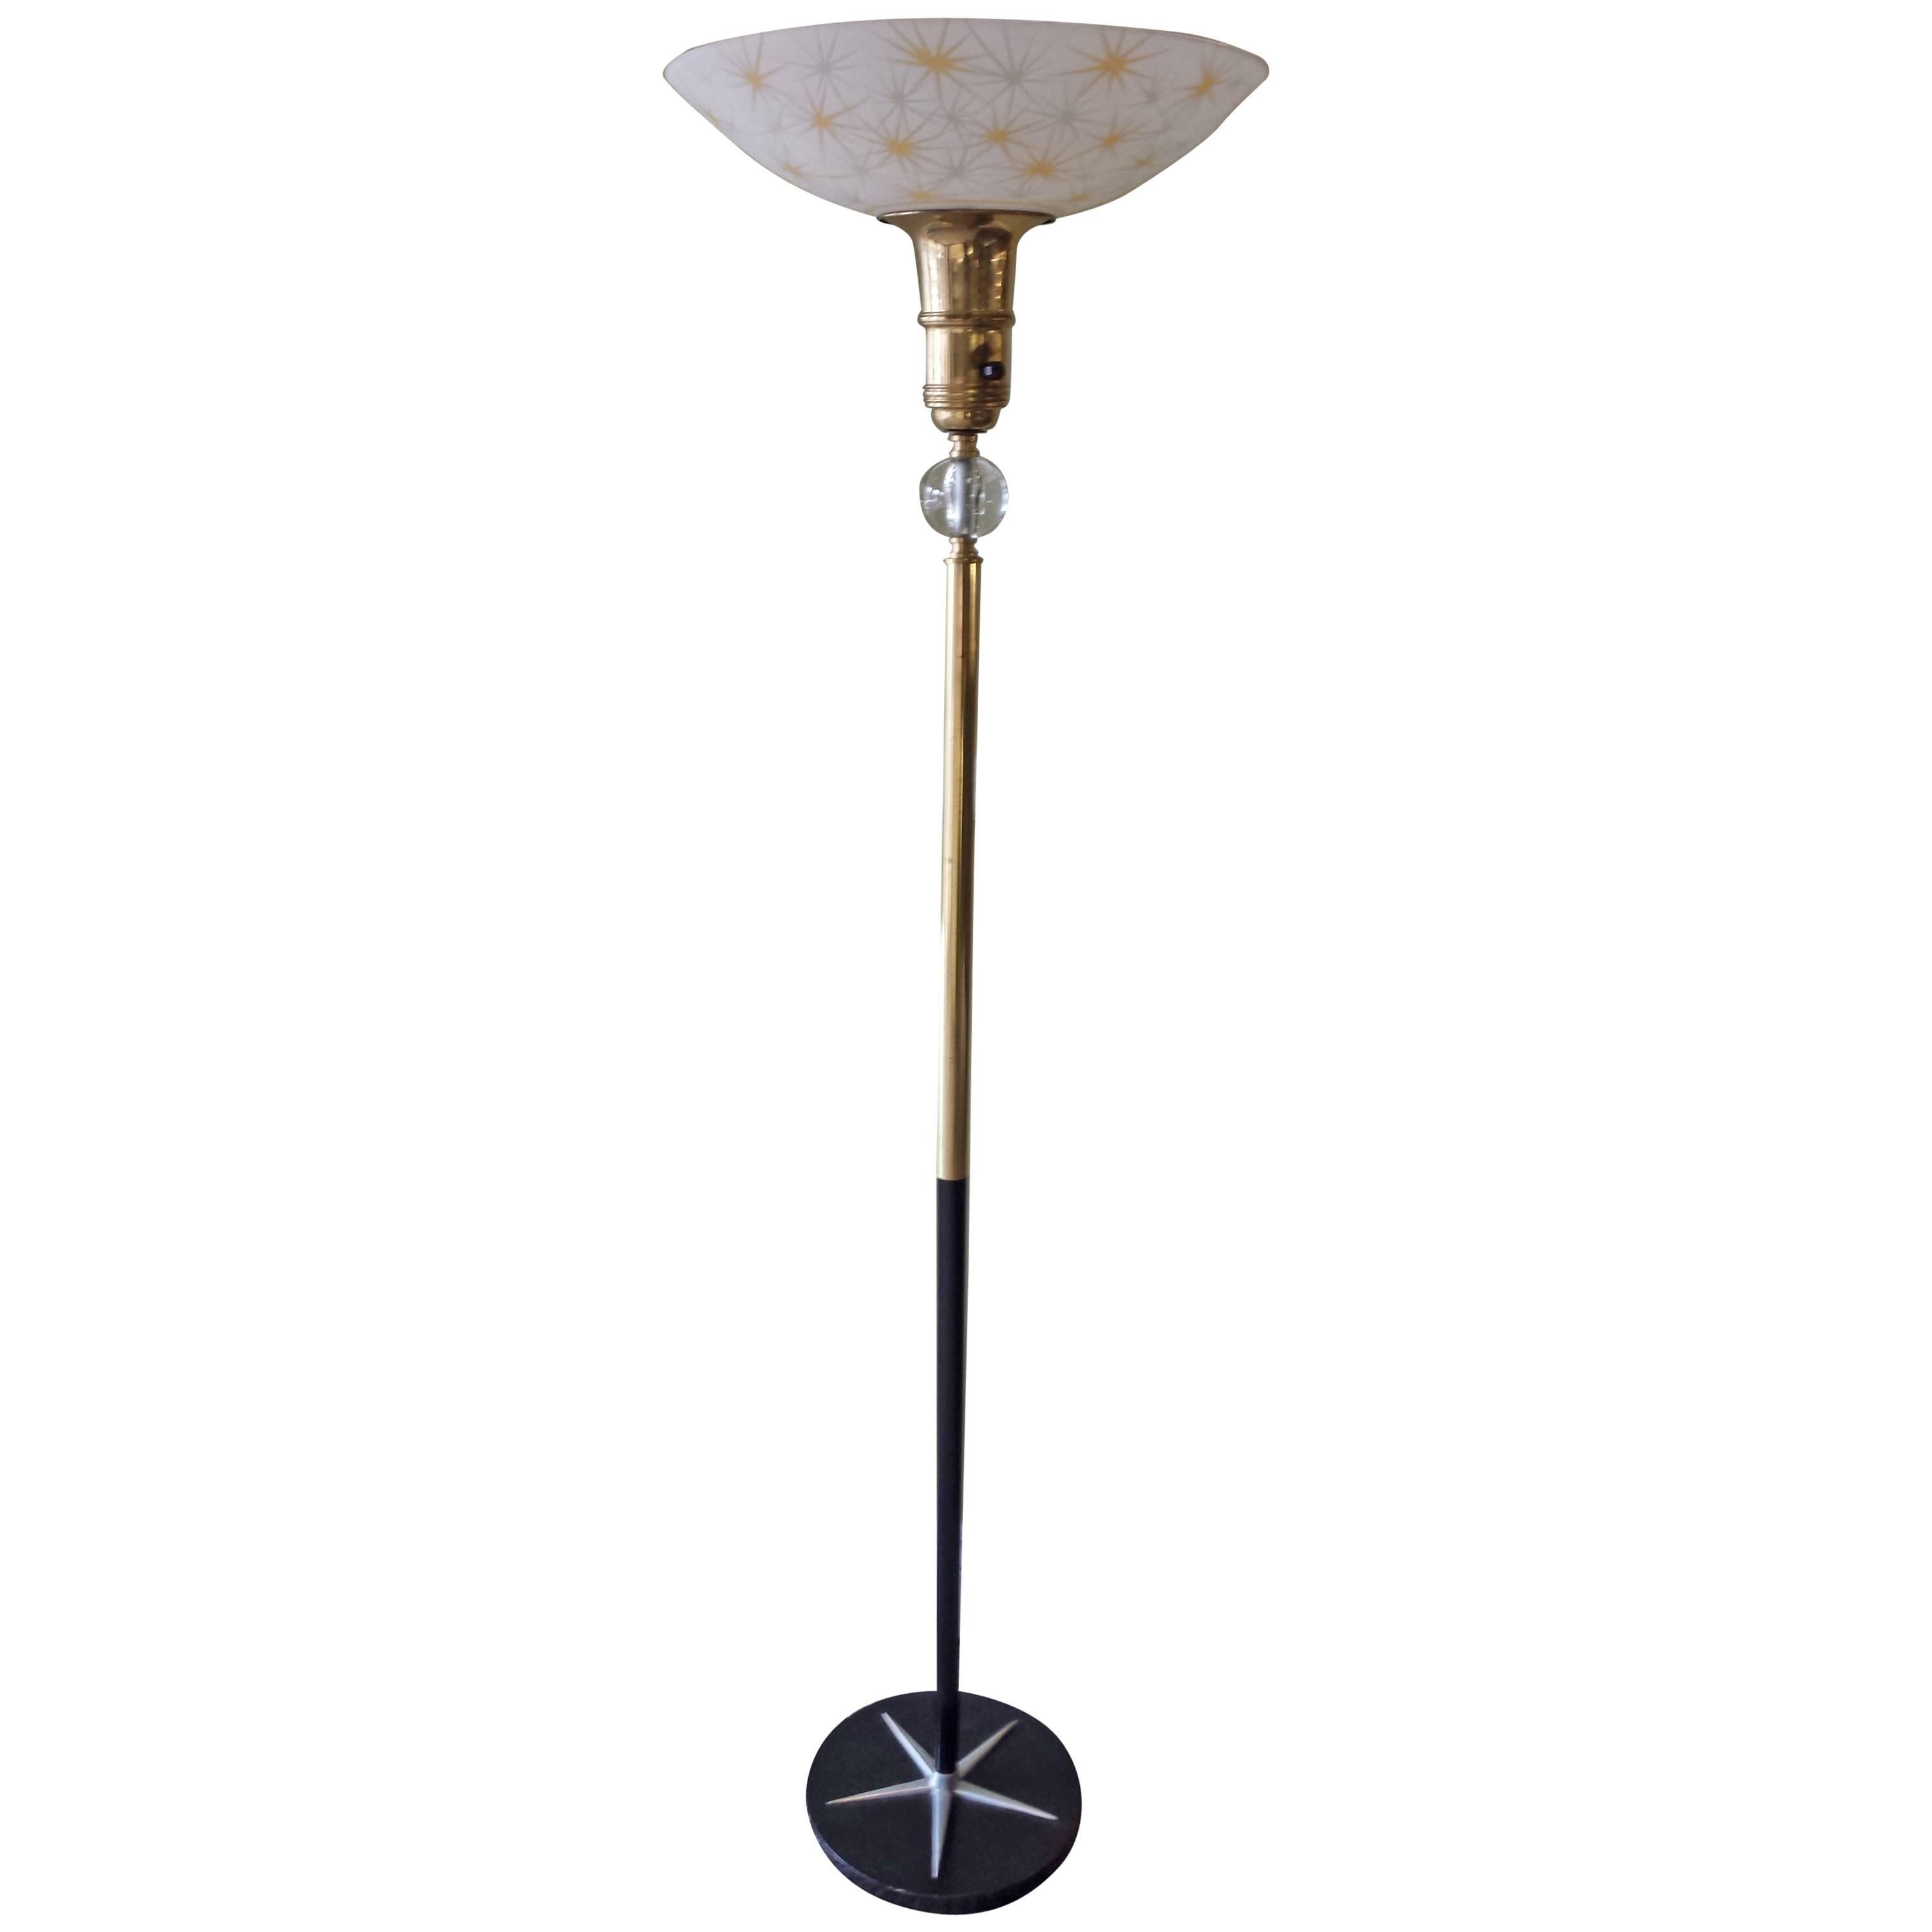 Atomic Cosmic 1960s Torchiere Floor Lamp with a Star Burst Pattern Base For Sale